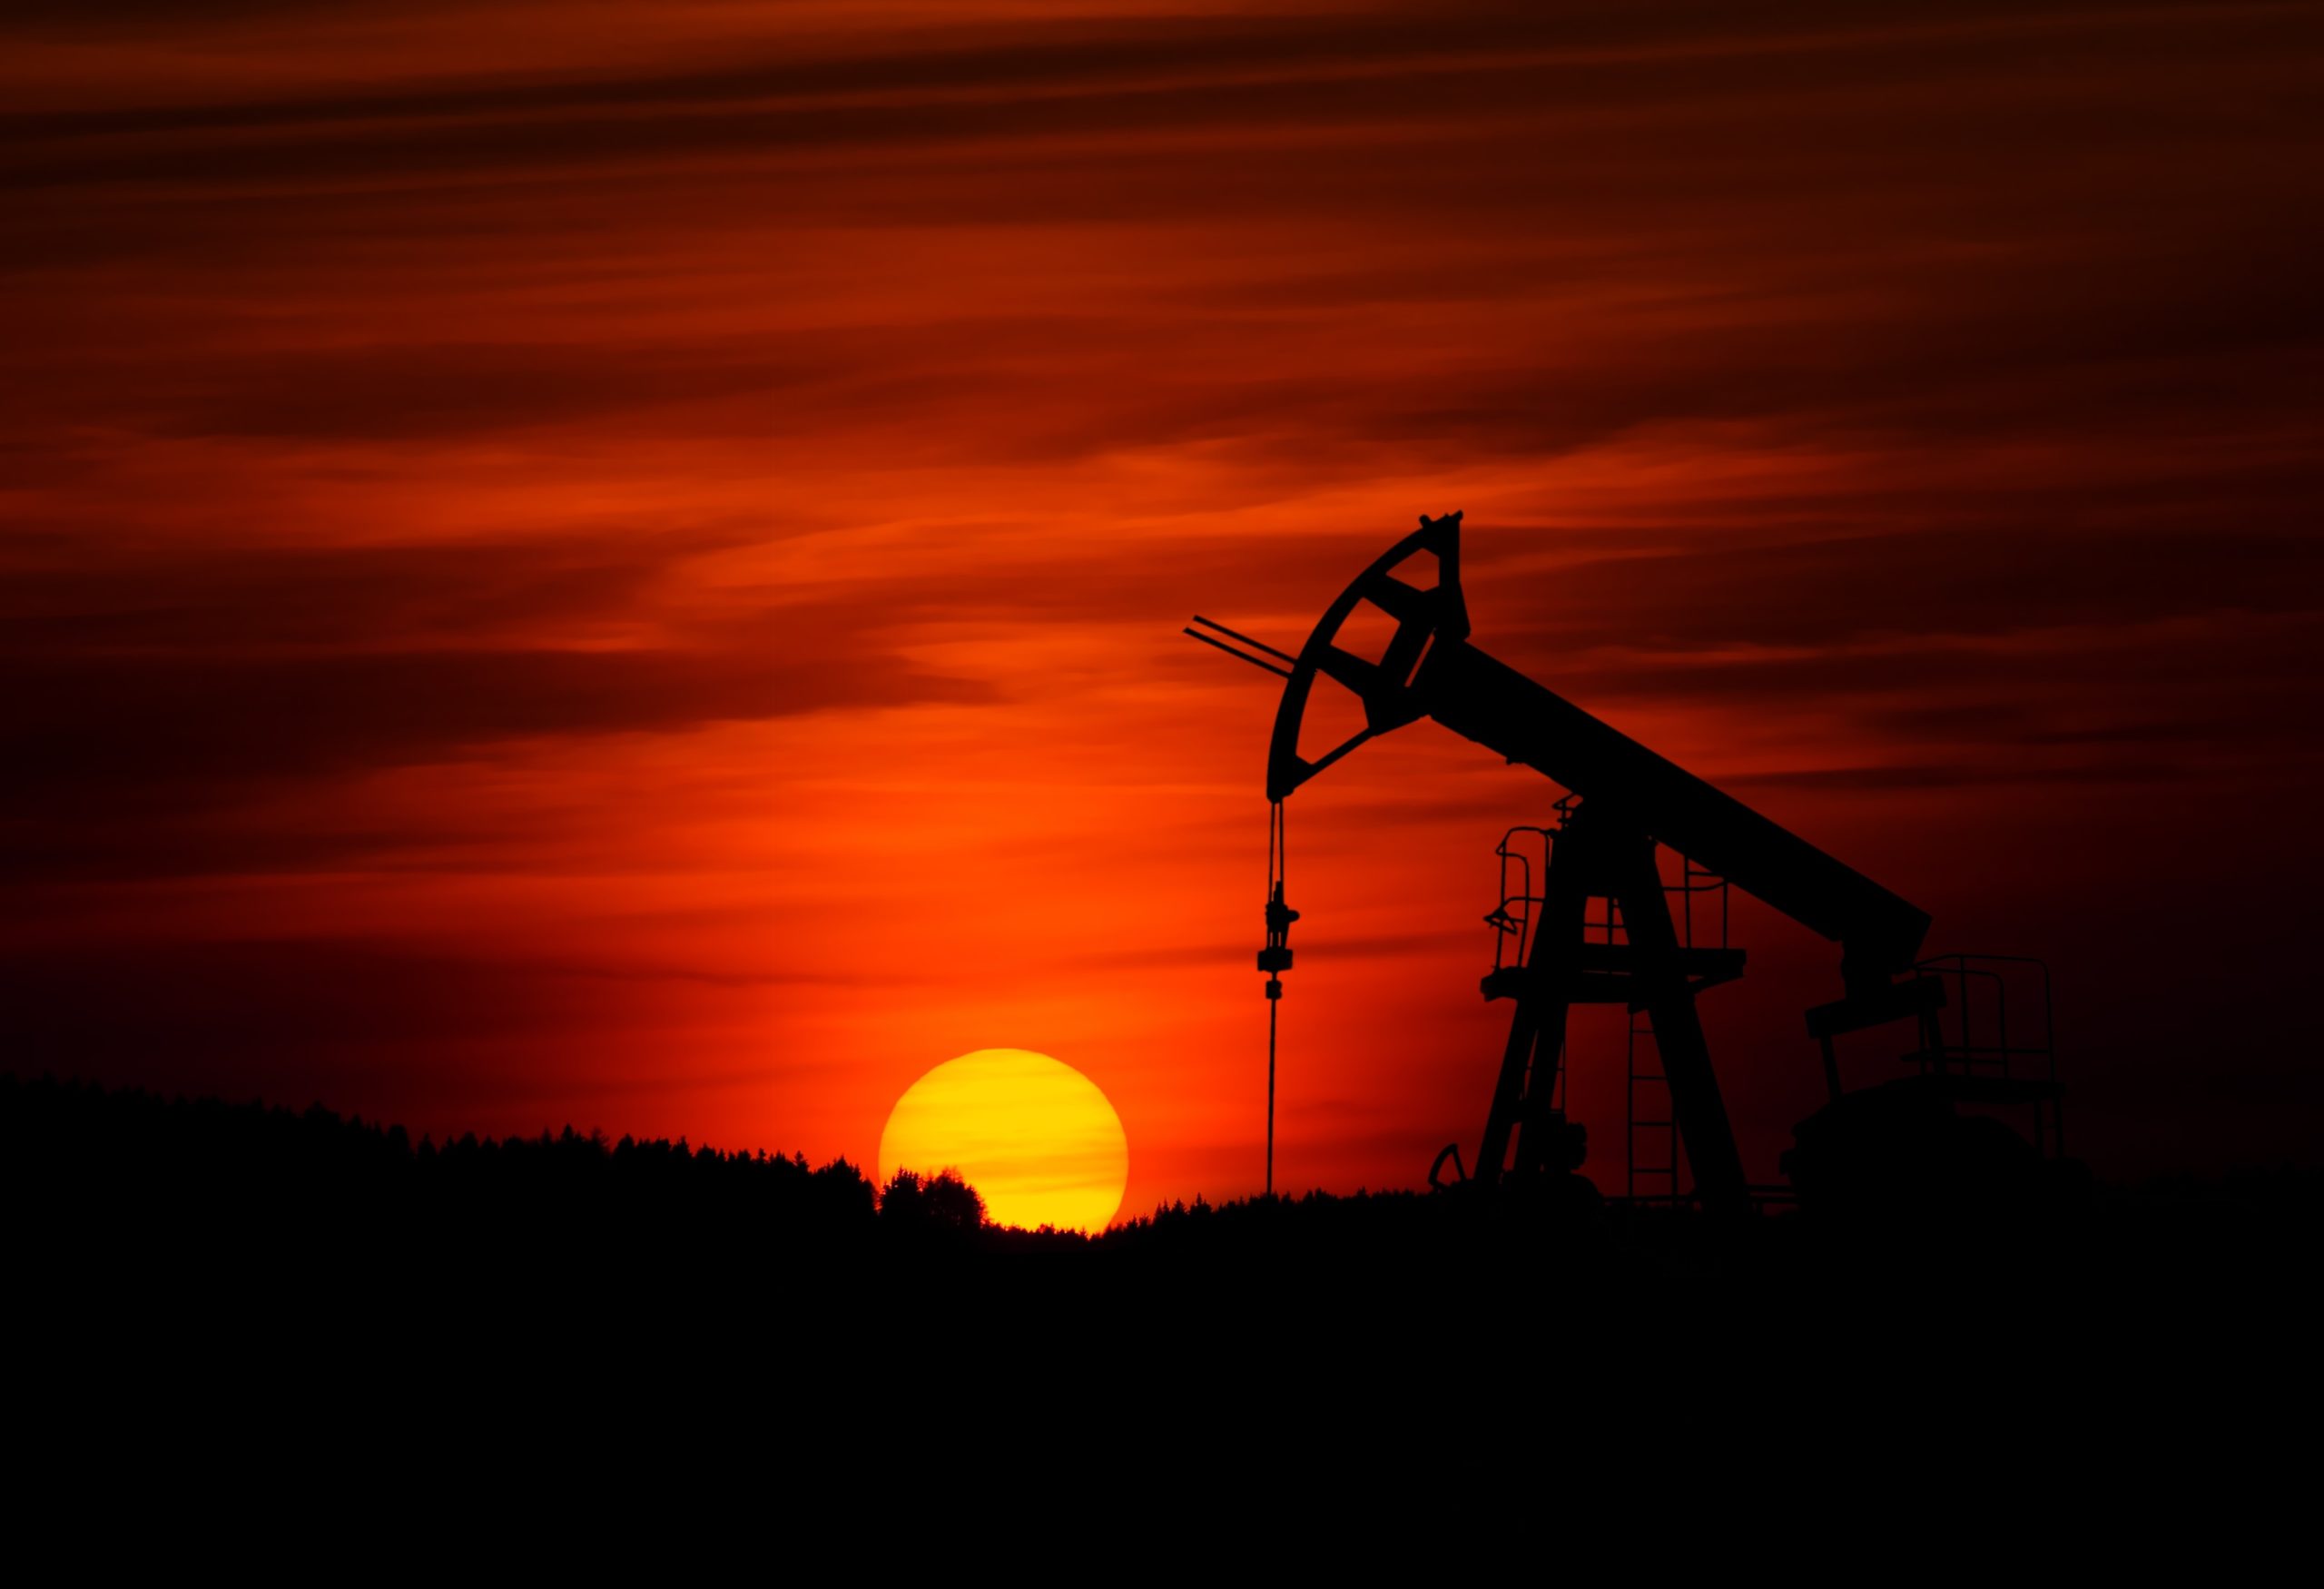 A pump-jack is mining crude oil against a sunset.